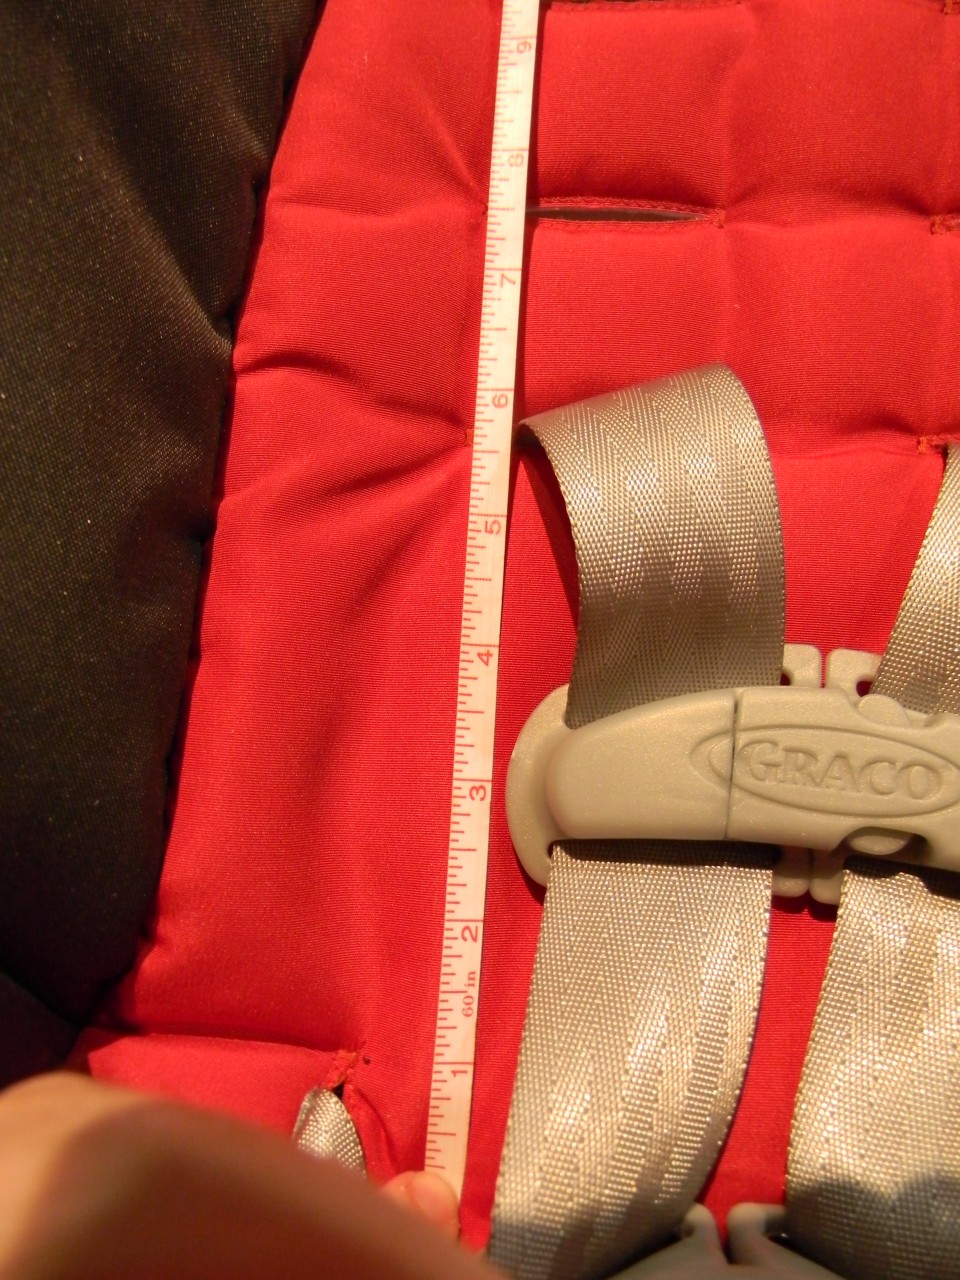 ABC Kids Expo 2012: What’s new from Graco! – CarseatBlog